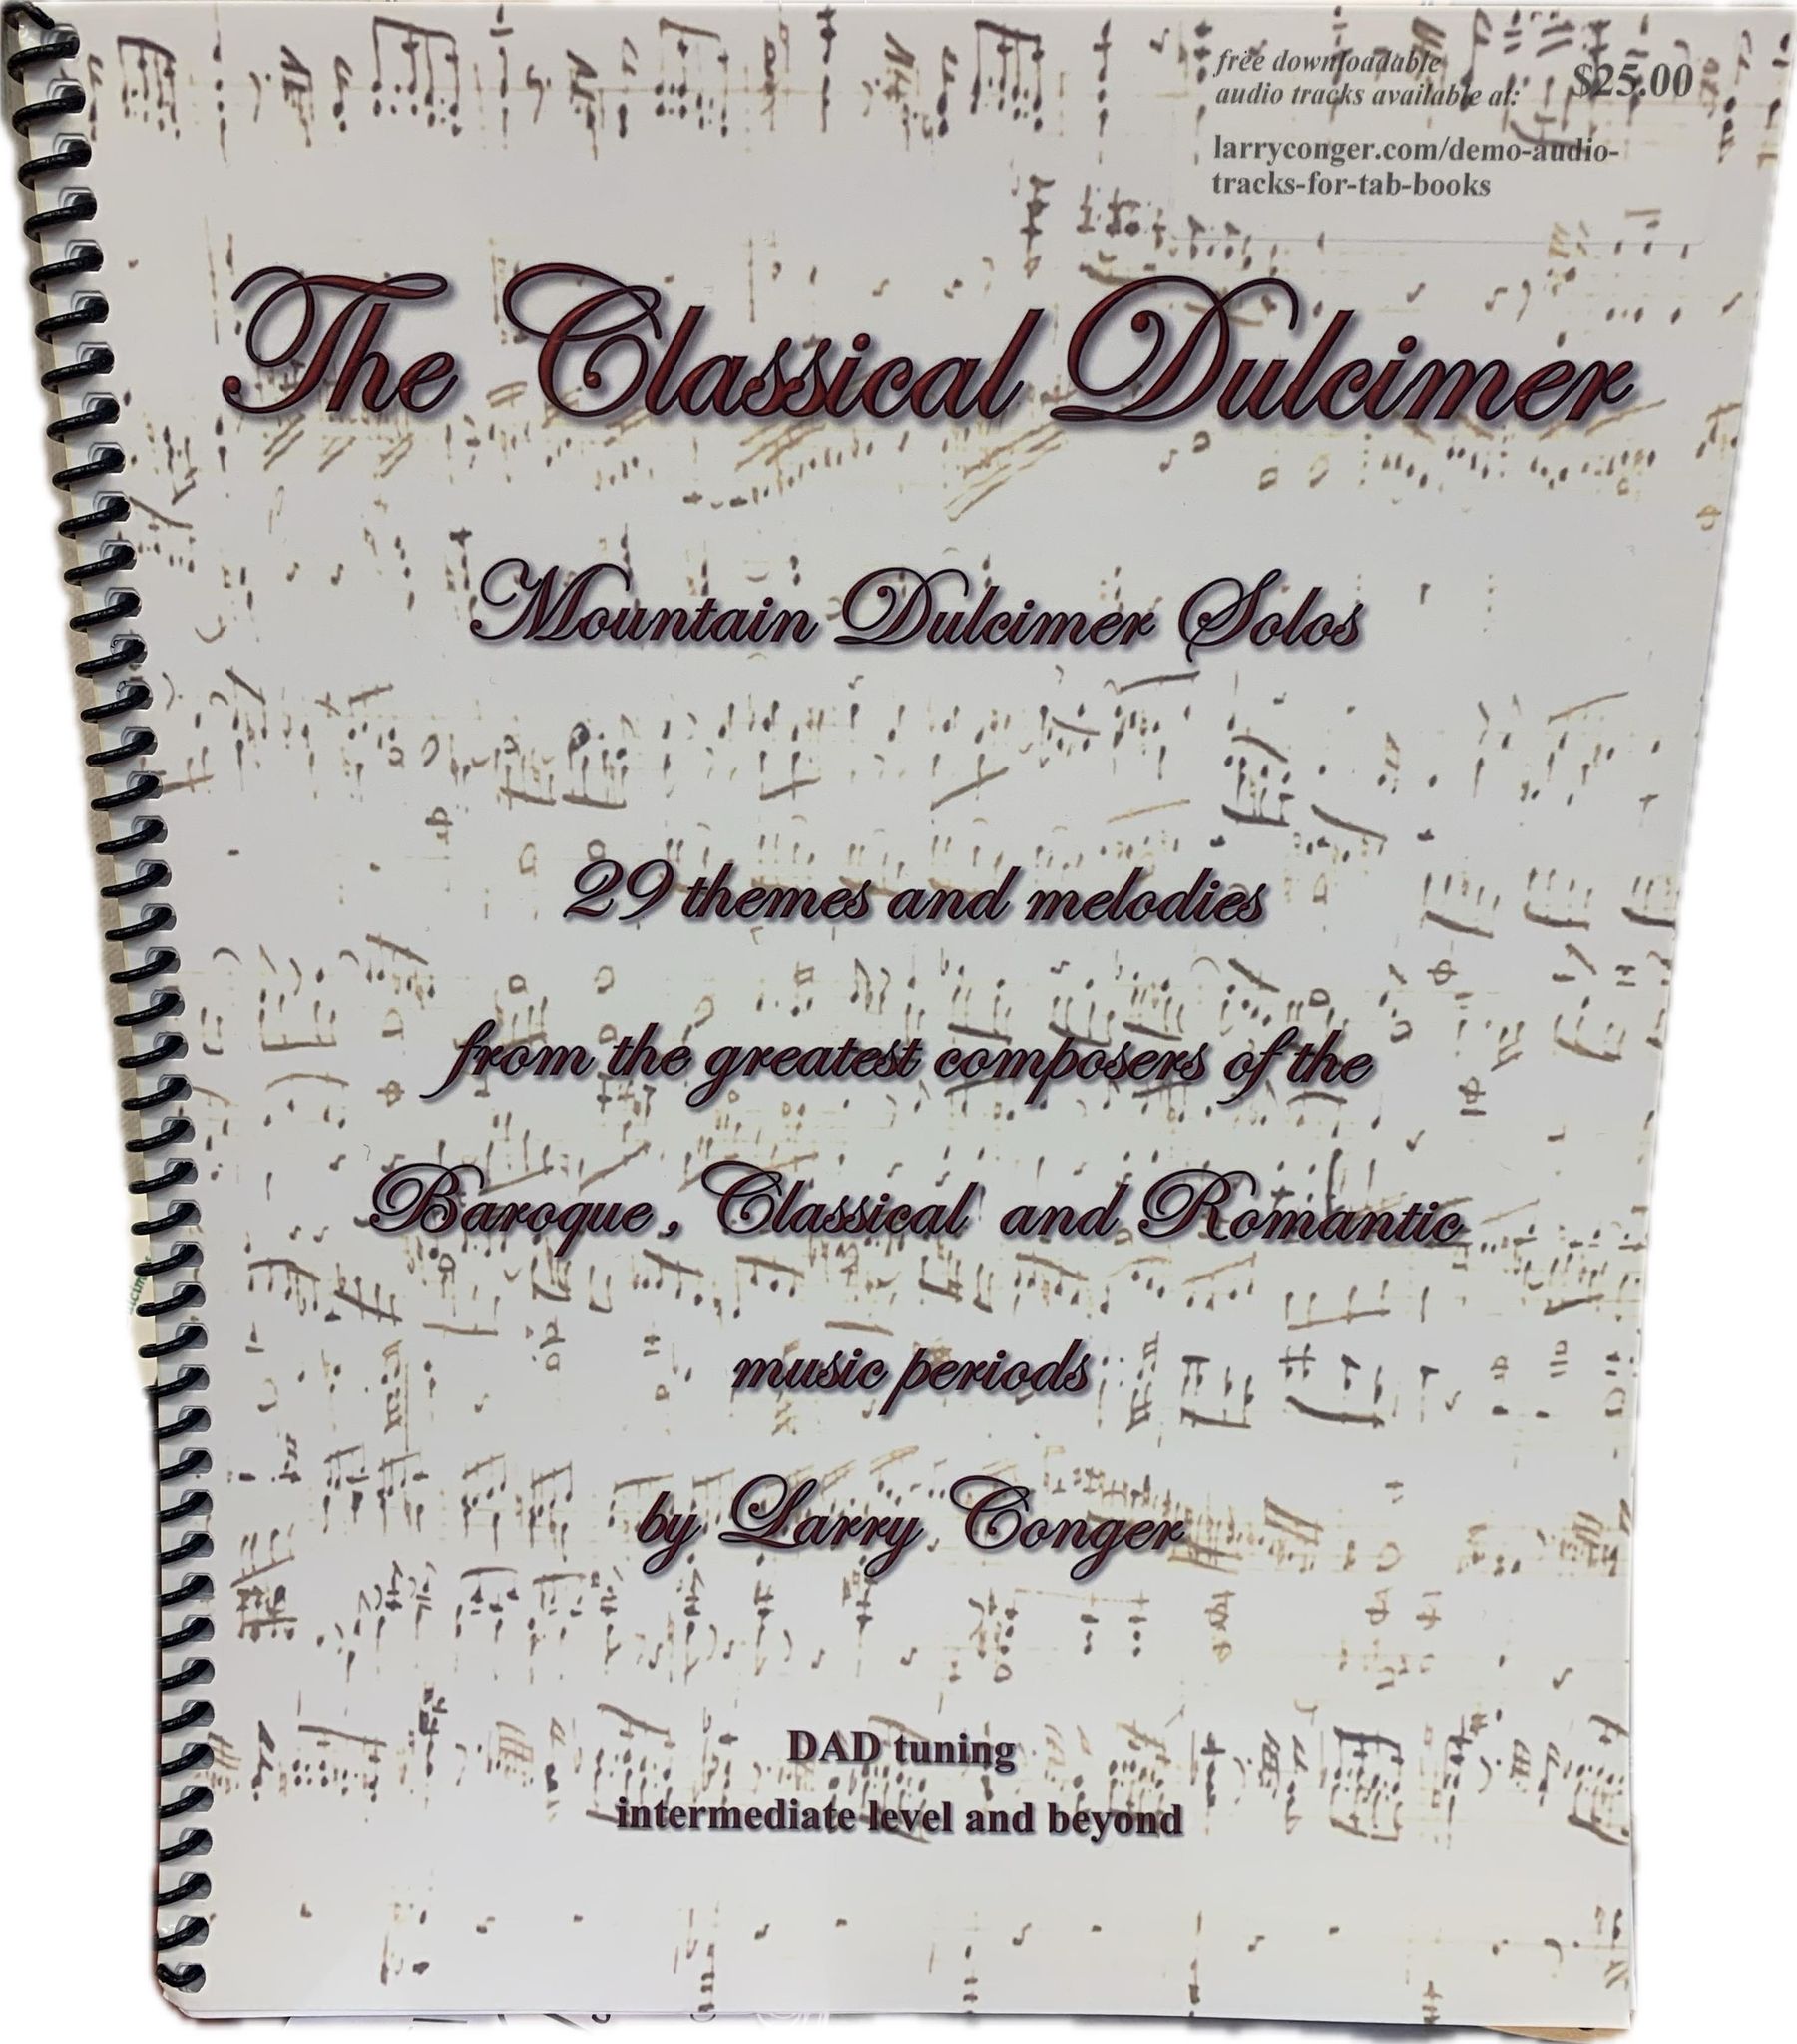 The classical dulcimer - by Larry Conger mountain dulcimer solos, featuring classical themes.